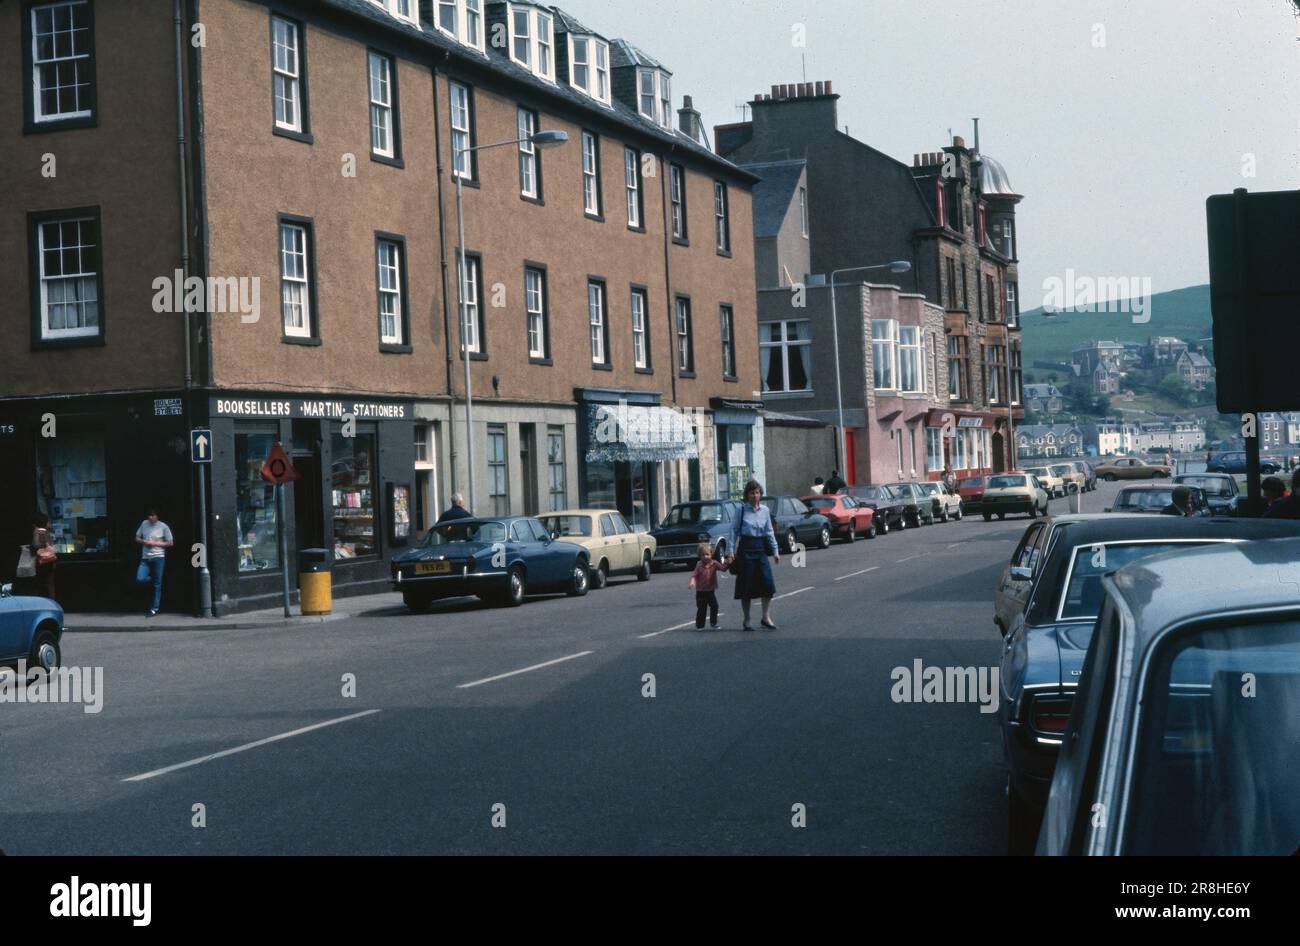 Campbeltown, Scotland, United Kingdom- July 1983: Intersection of Bolgam and Main streets in Campbeltown, view of buildings and shops. Stock Photo